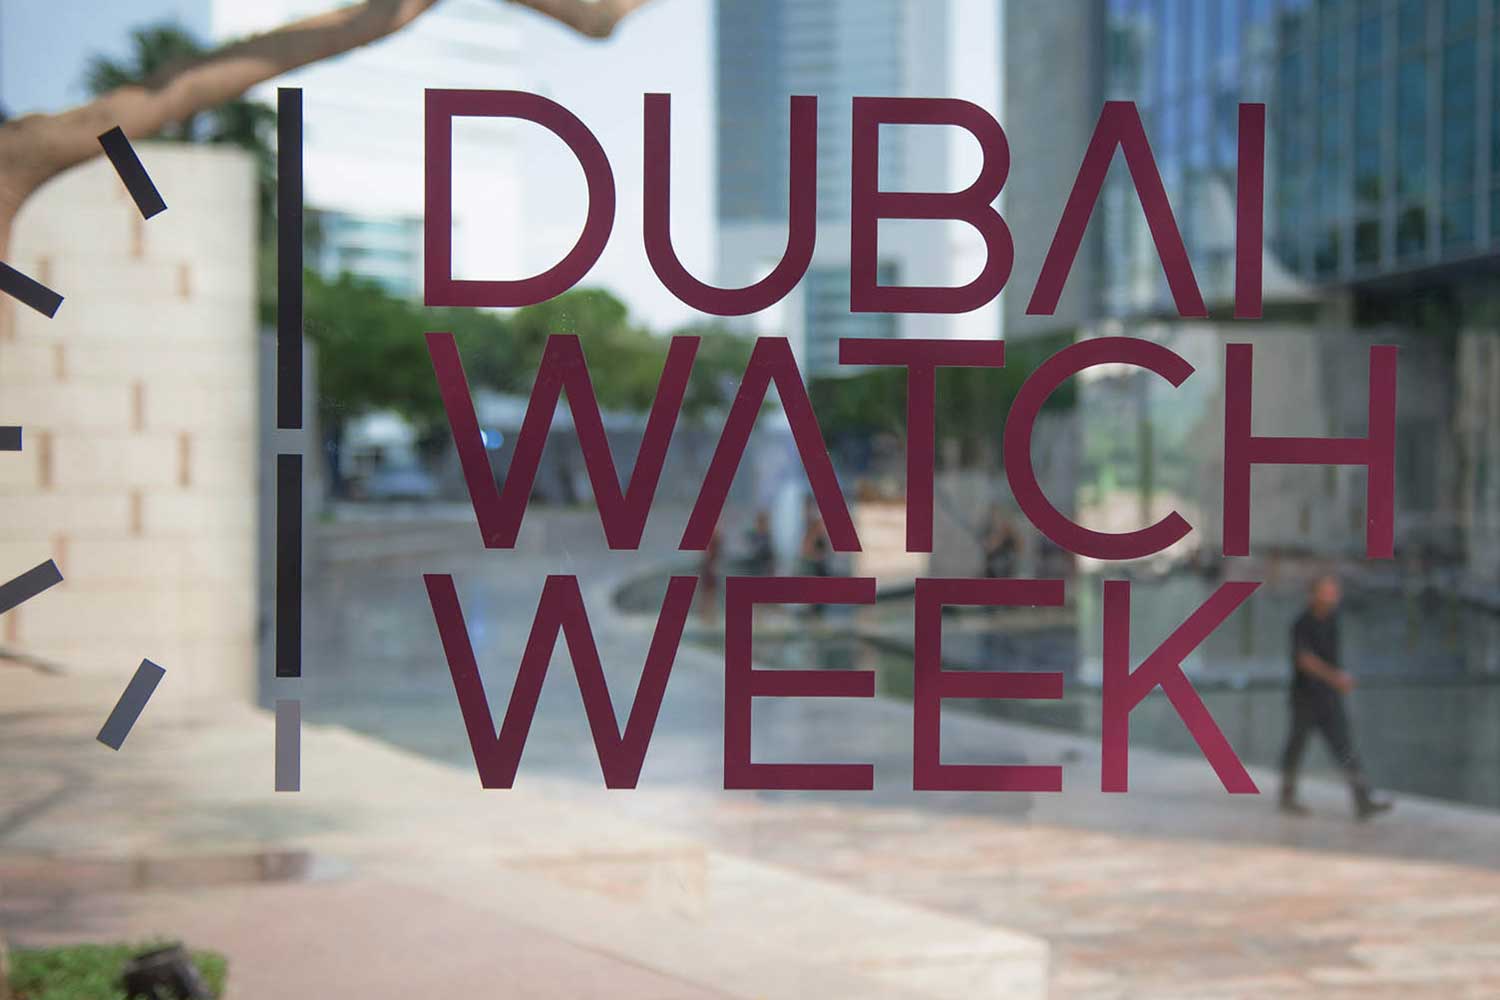 Hind Seddiqi is the chief marketing and communications officer at Seddiqi Holding and director general of the biennial event Dubai Watch Week